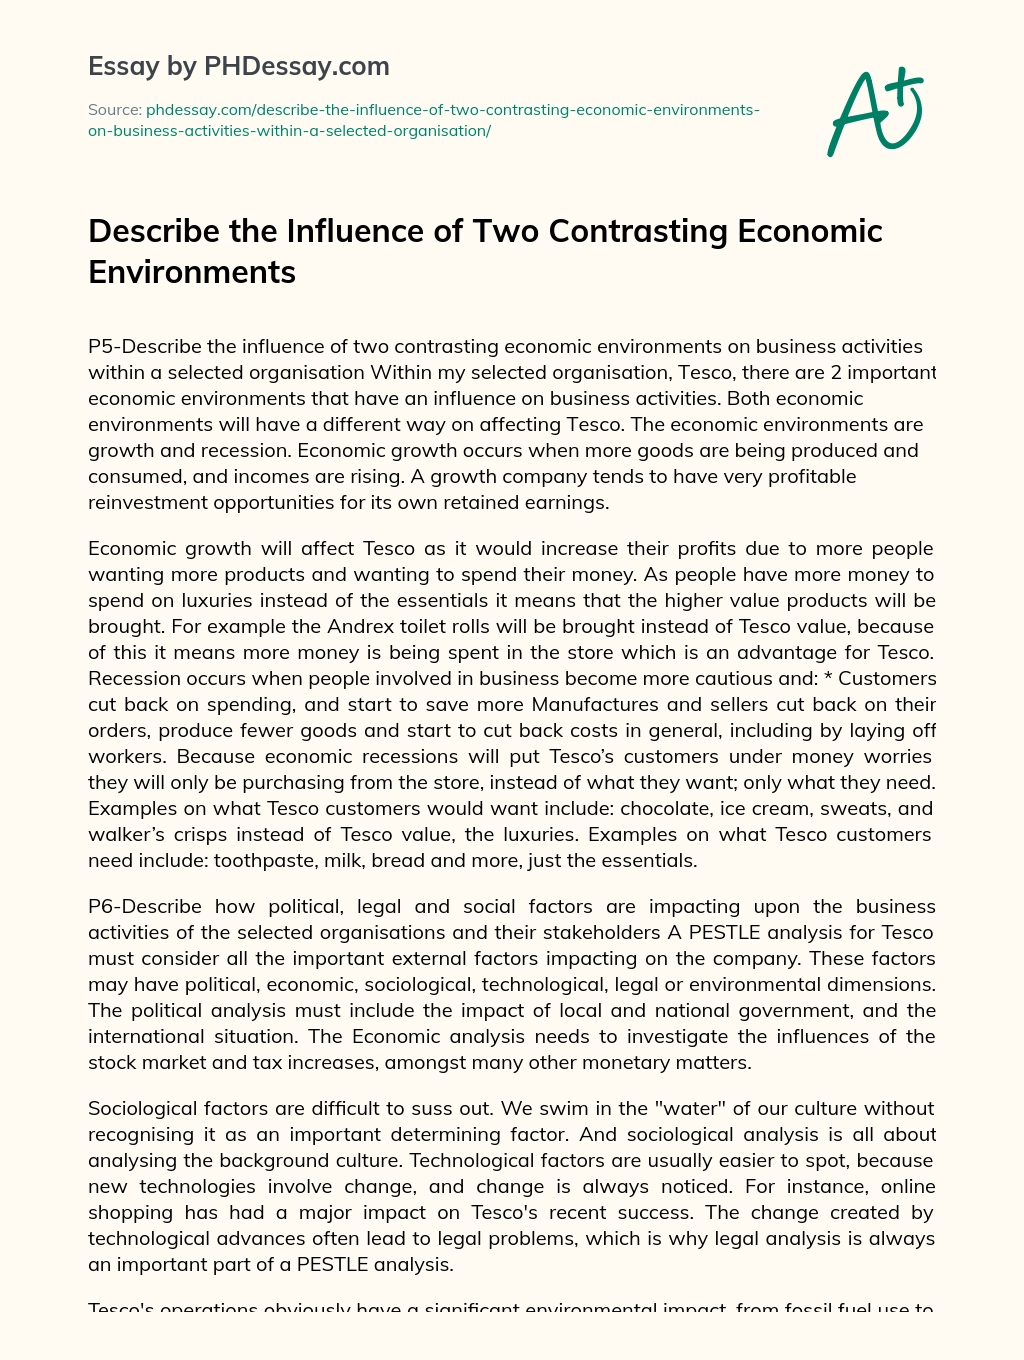 Describe the Influence of Two Contrasting Economic Environments essay